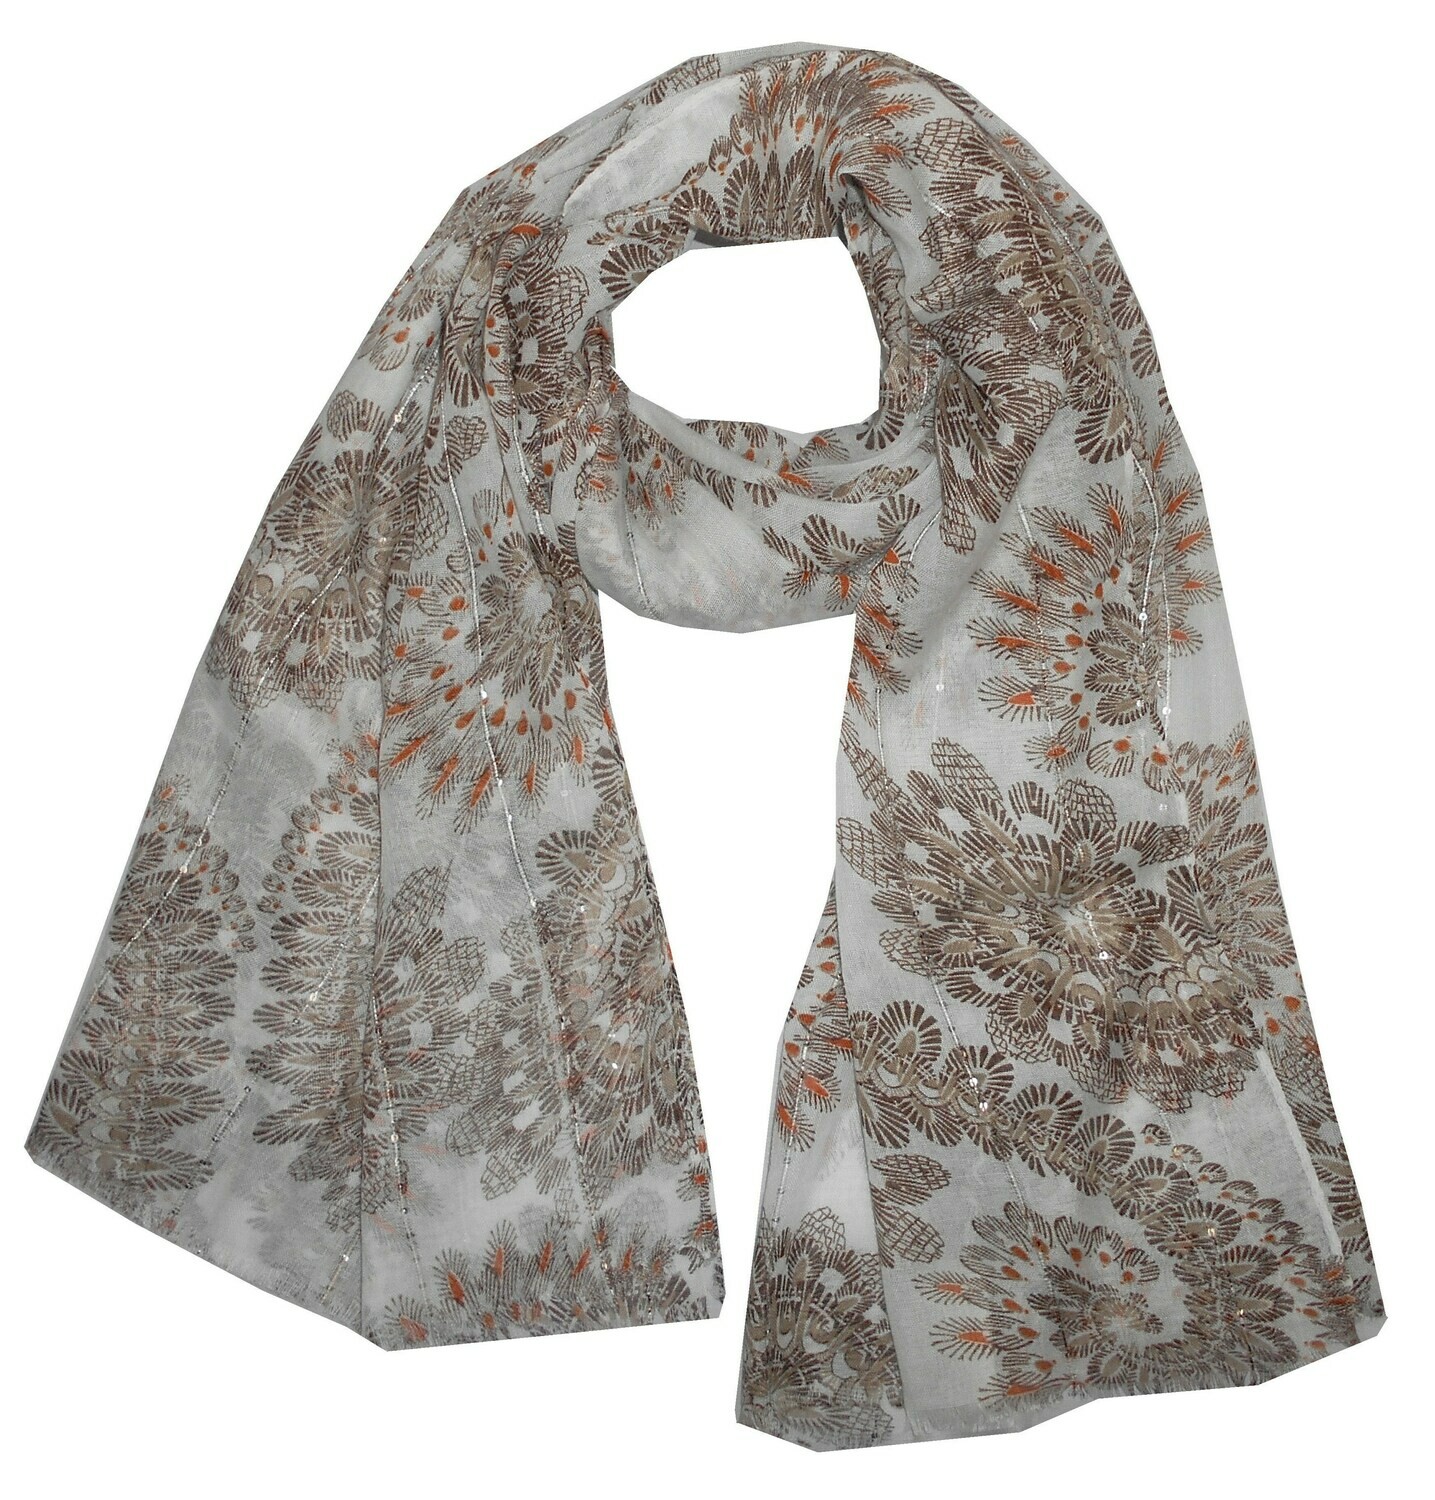 Printed Large scarves in sequins fabric